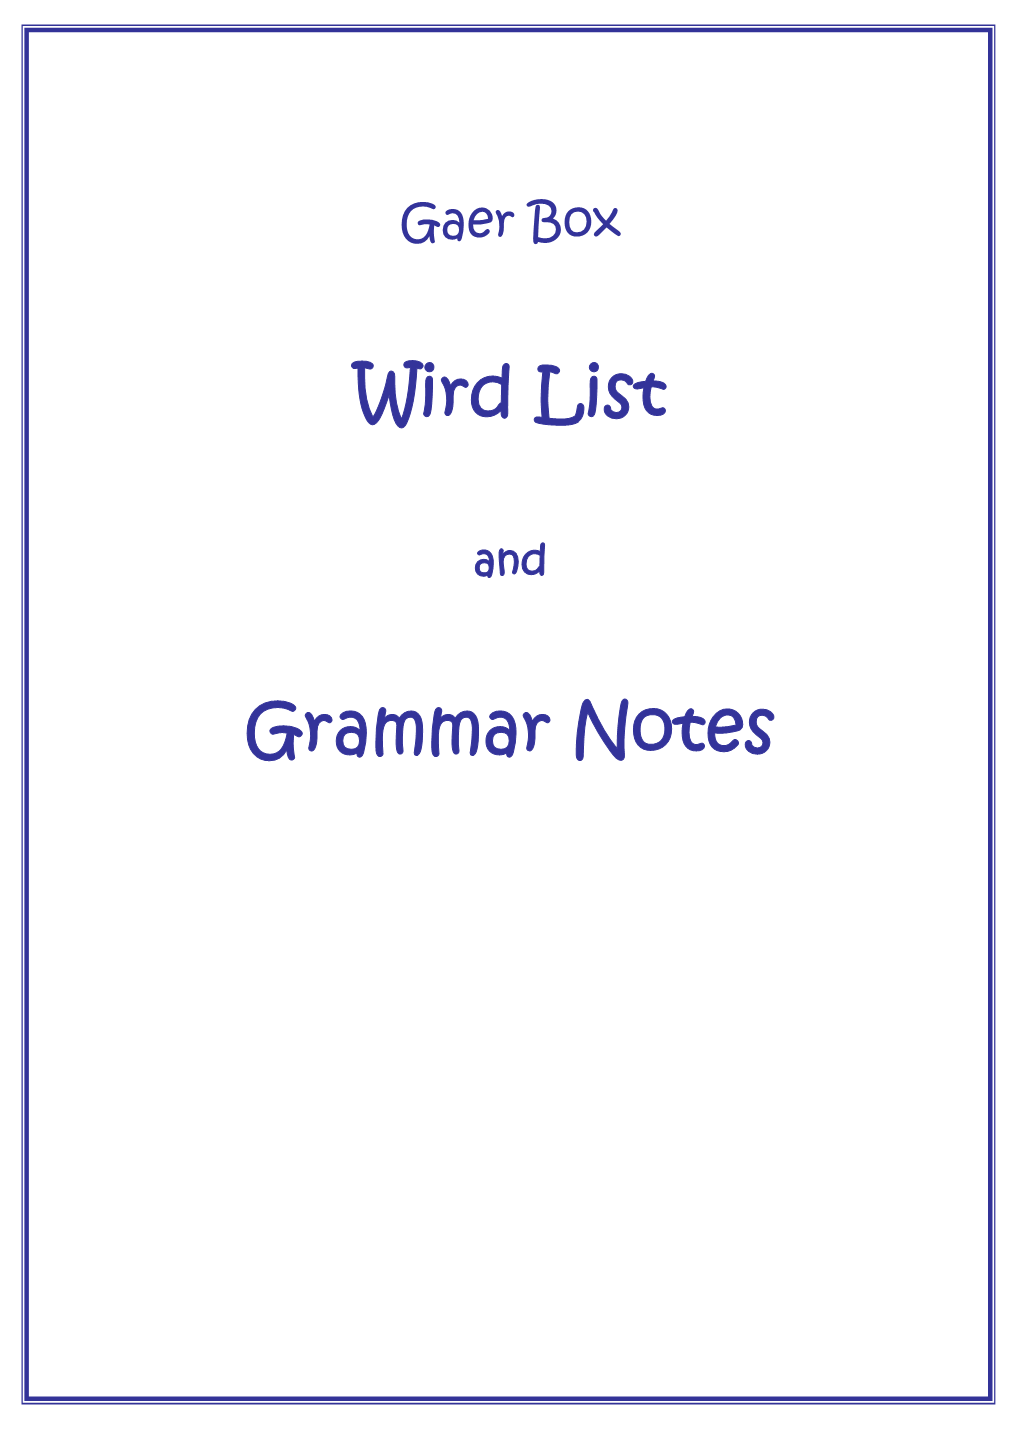 Word List and Grammar Notes